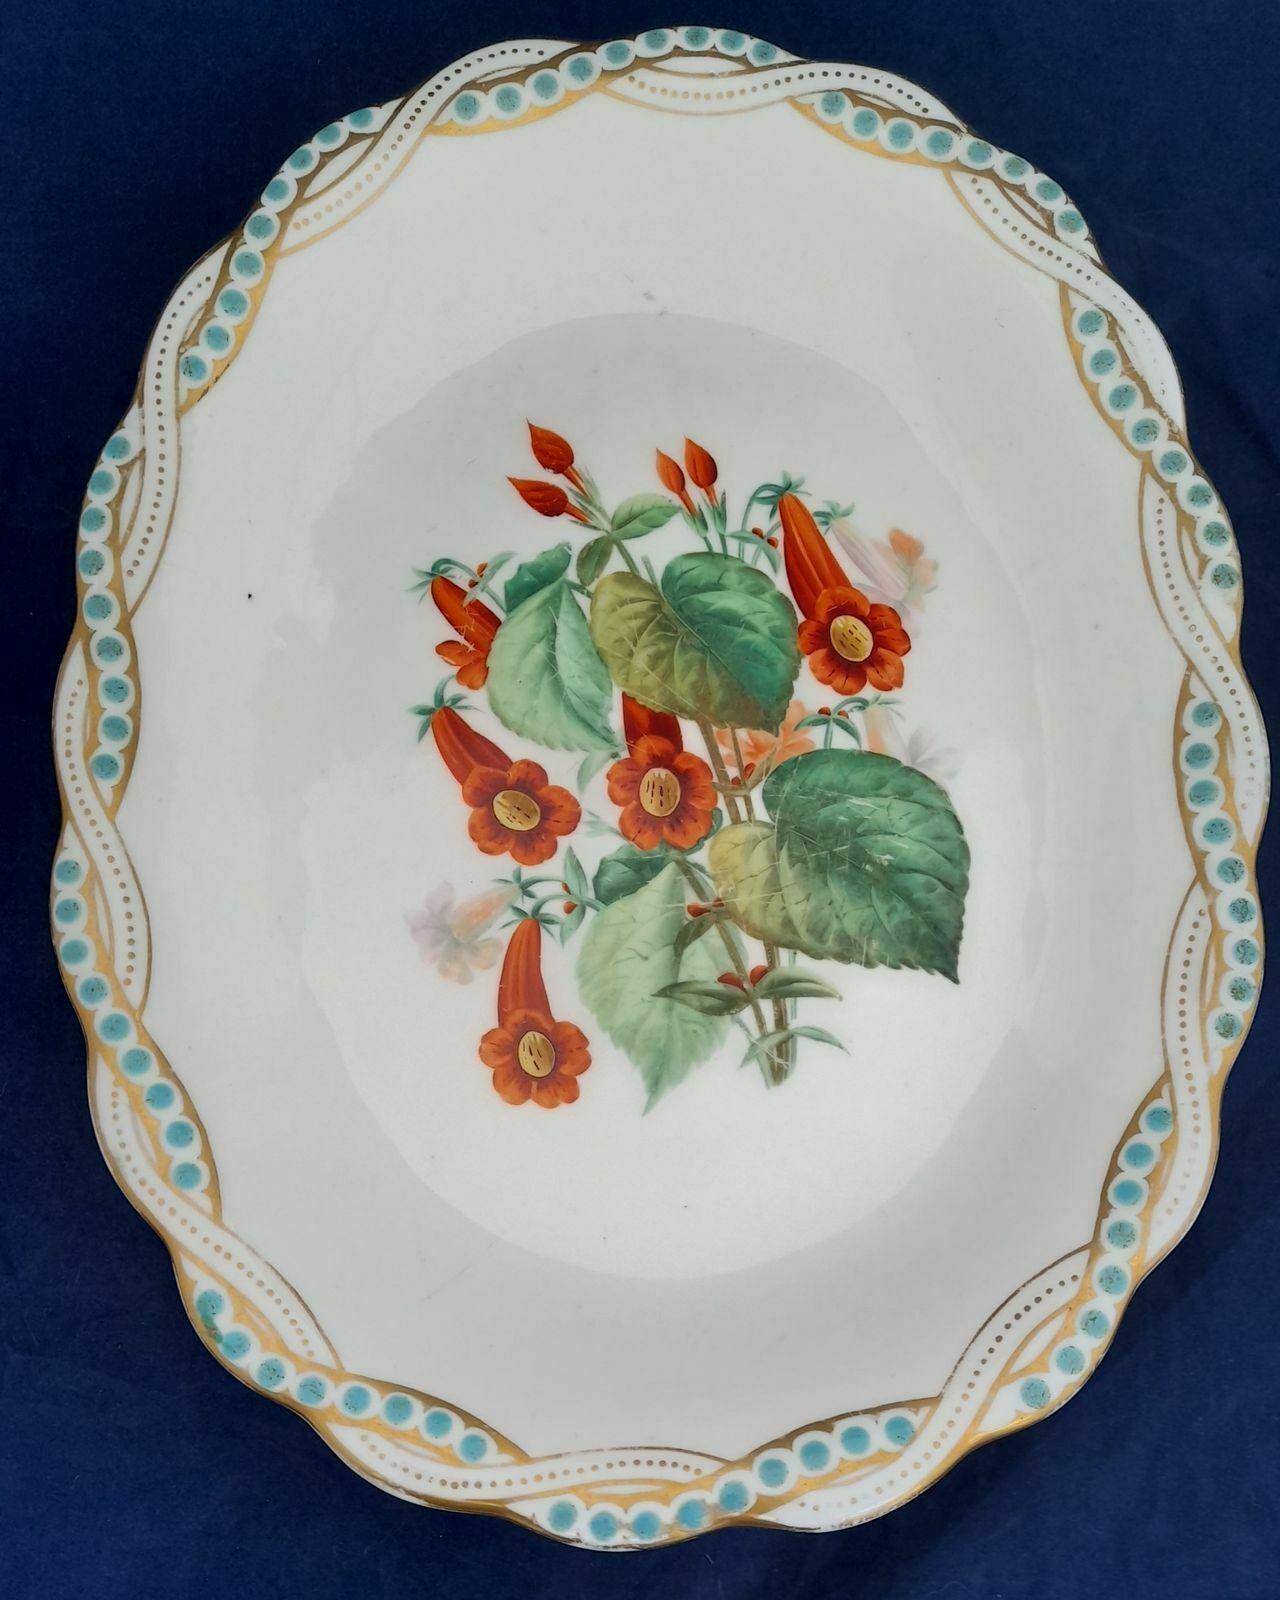 Antique 1840s Victorian Dessert Service Comport Compote Cake stand Probably Minton Argyle Pattern Hand Painted Campanula Flowers